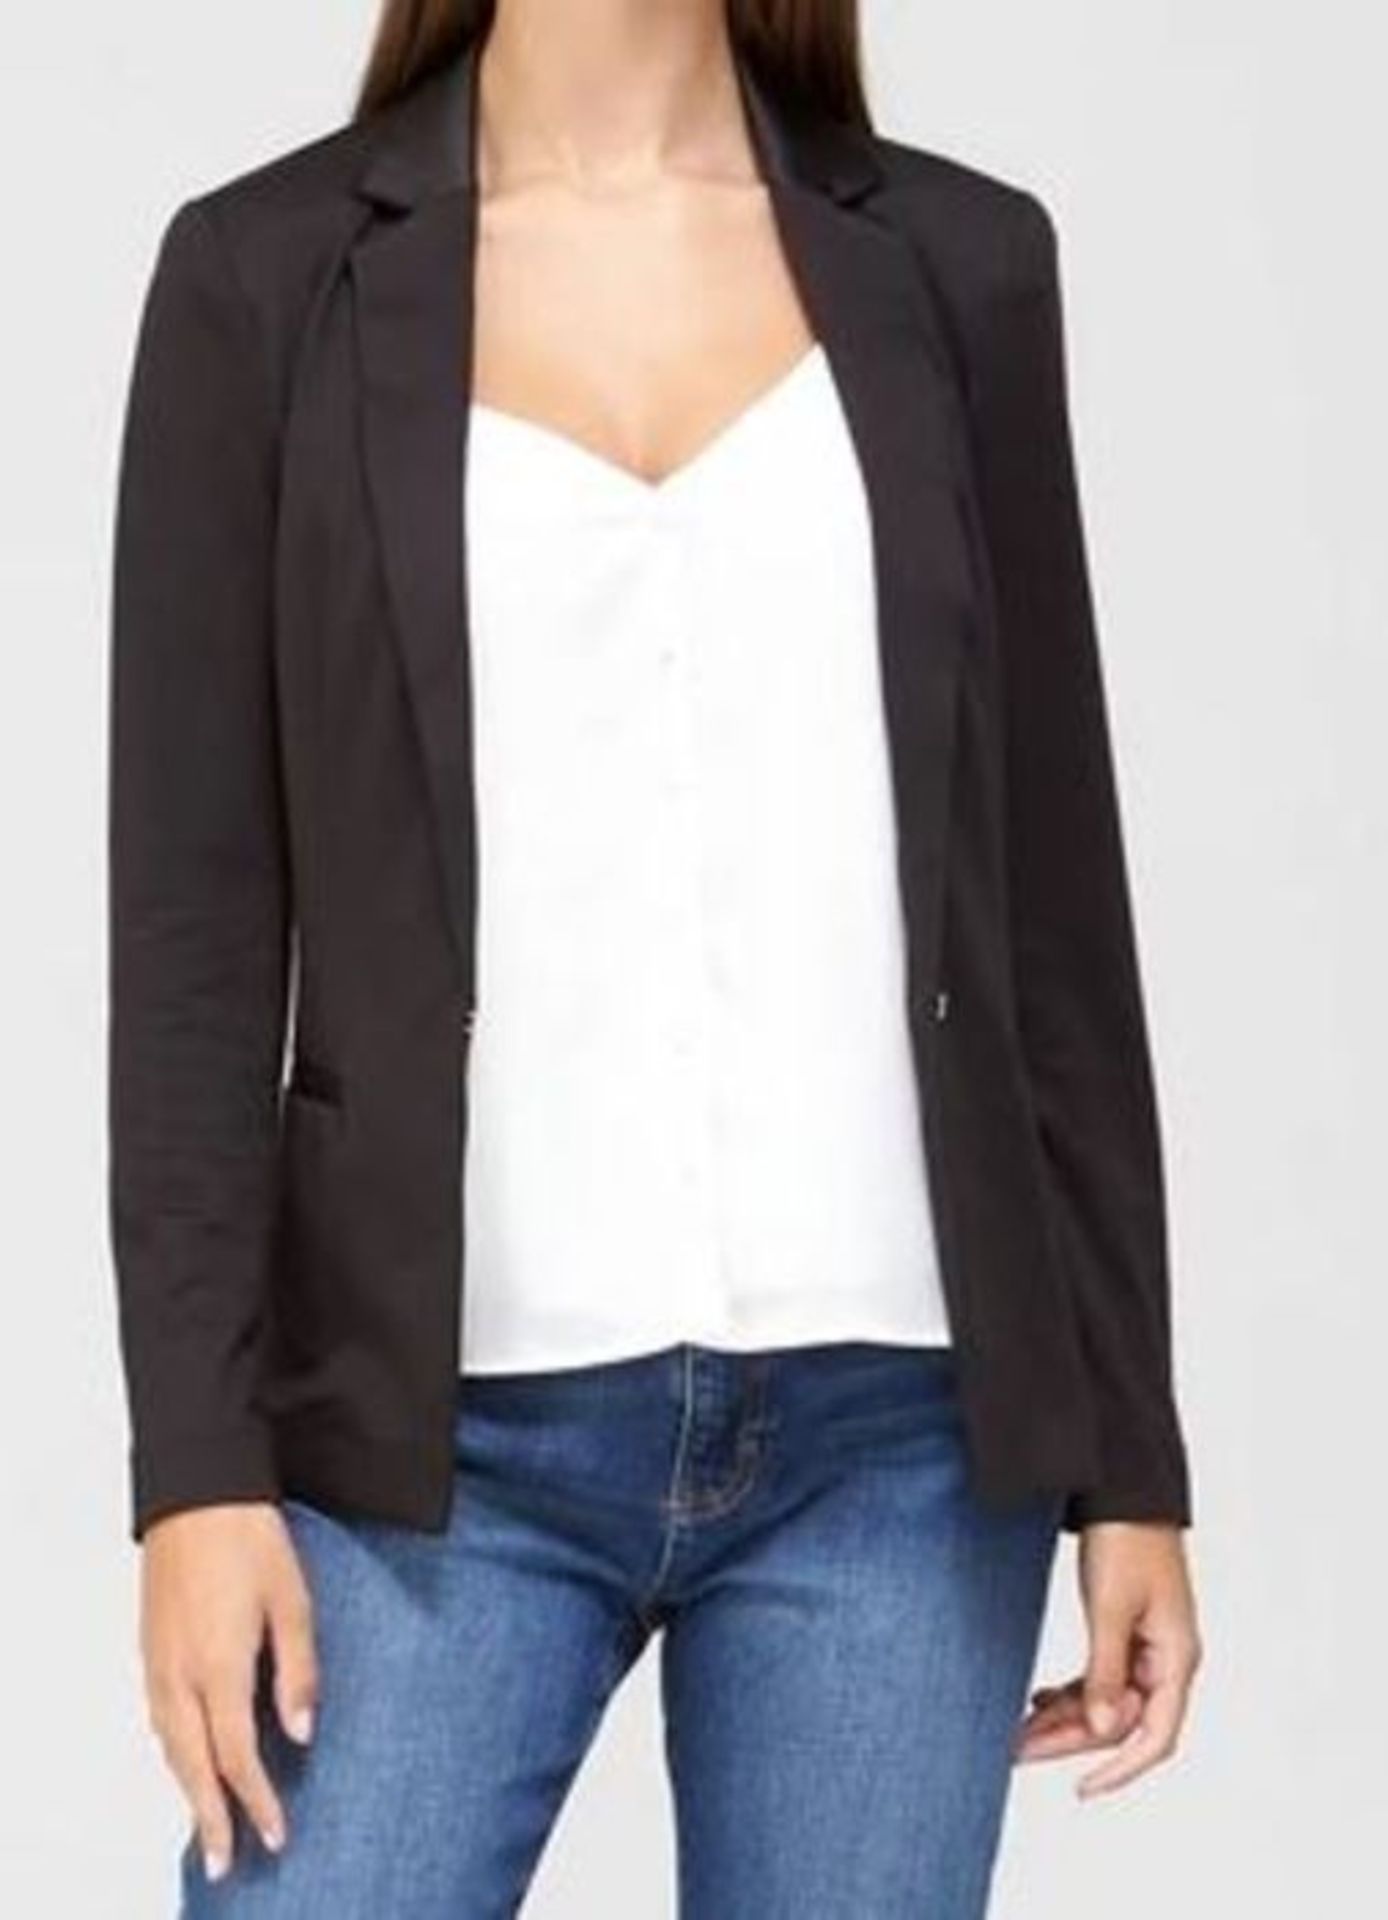 2 X V BY VERY VALUE PONTE JACKET - BLACK / SIZE 18 / RRP £50.00 / BRAND NEW WITH TAGS